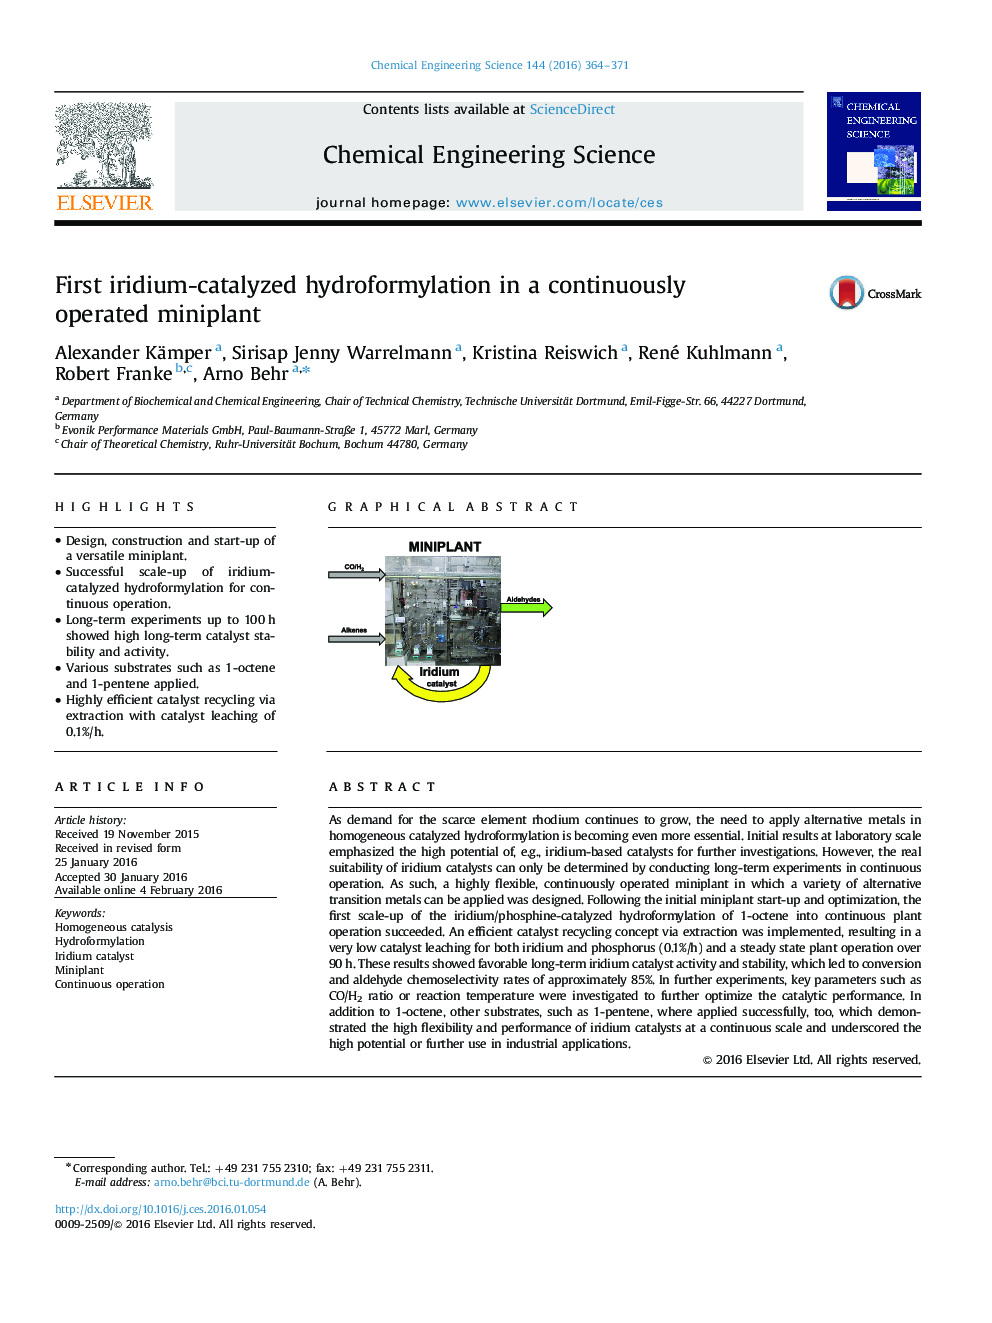 First iridium-catalyzed hydroformylation in a continuously operated miniplant